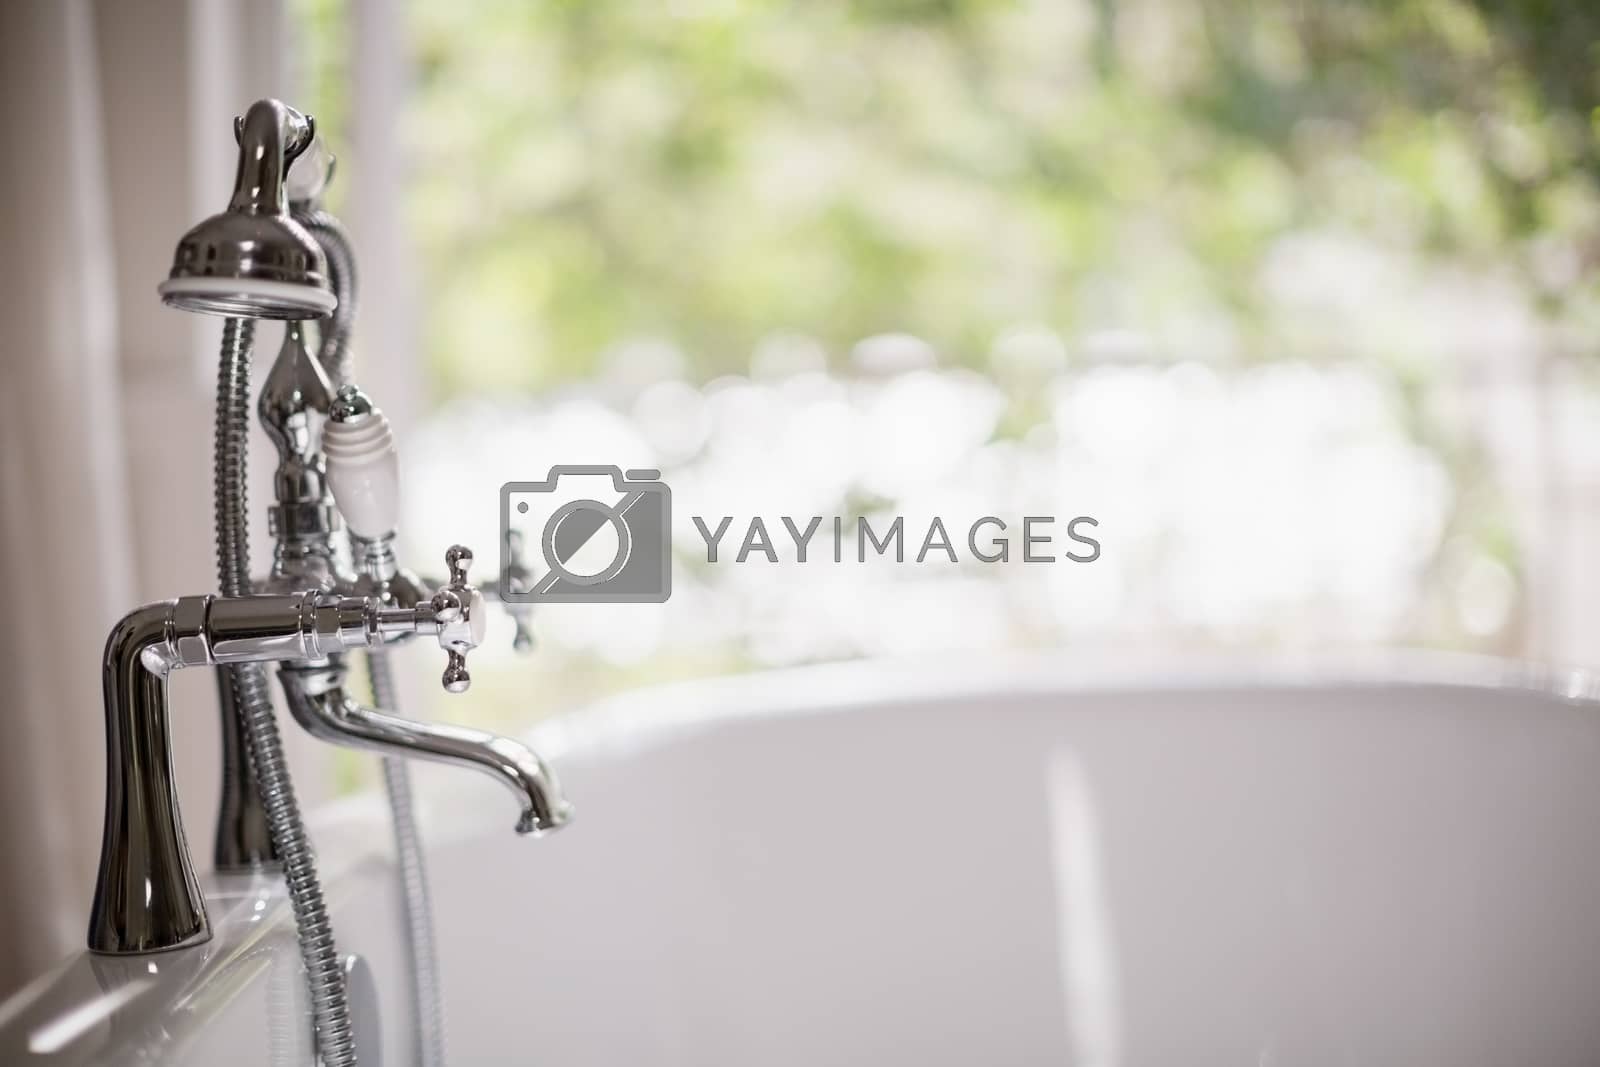 Royalty free image of Close-up of tap with bathtub by Wavebreakmedia